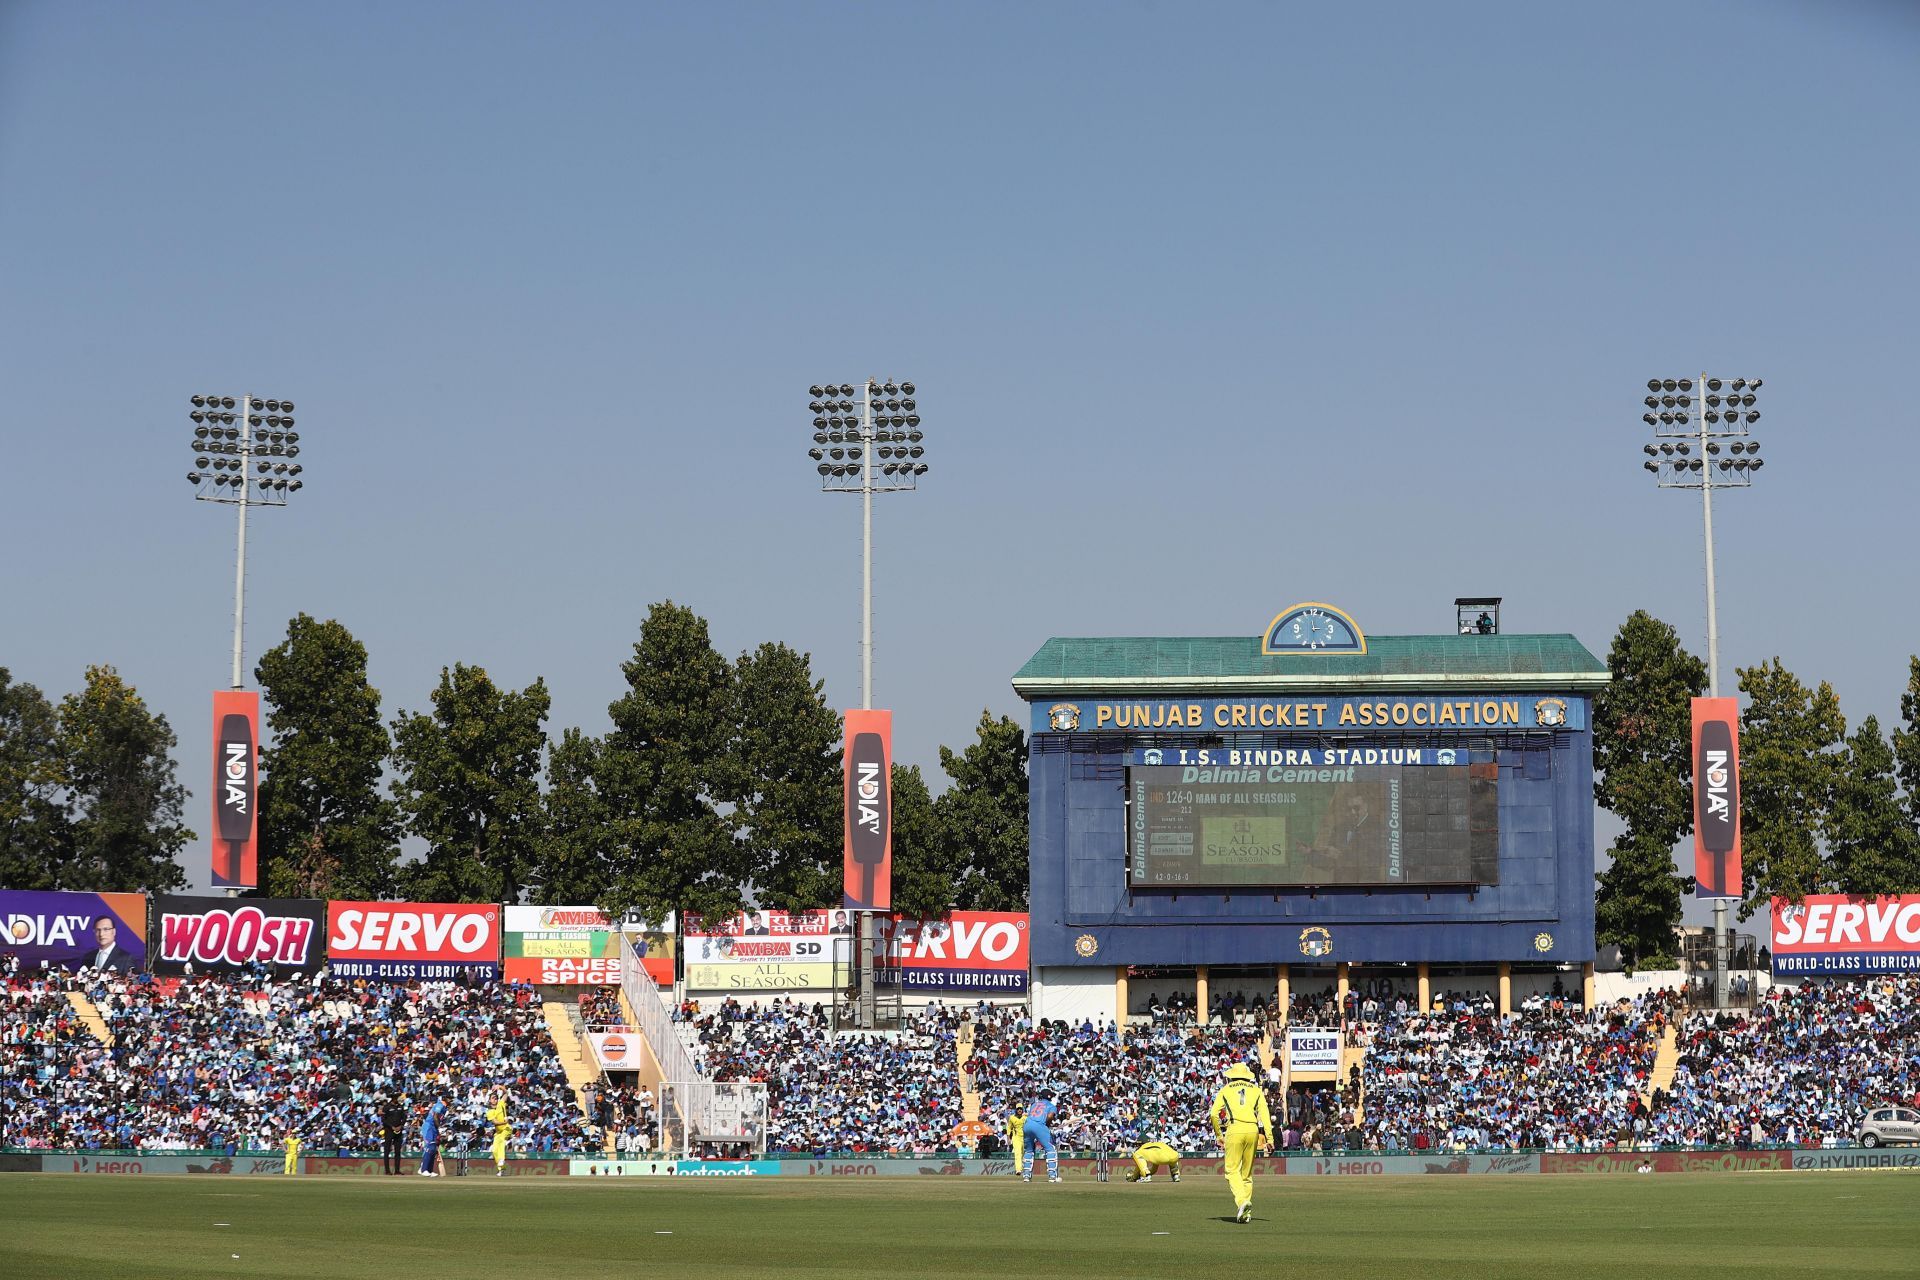 Mohali will host the first match of the ICC World Test Championship series between India and Sri Lanka